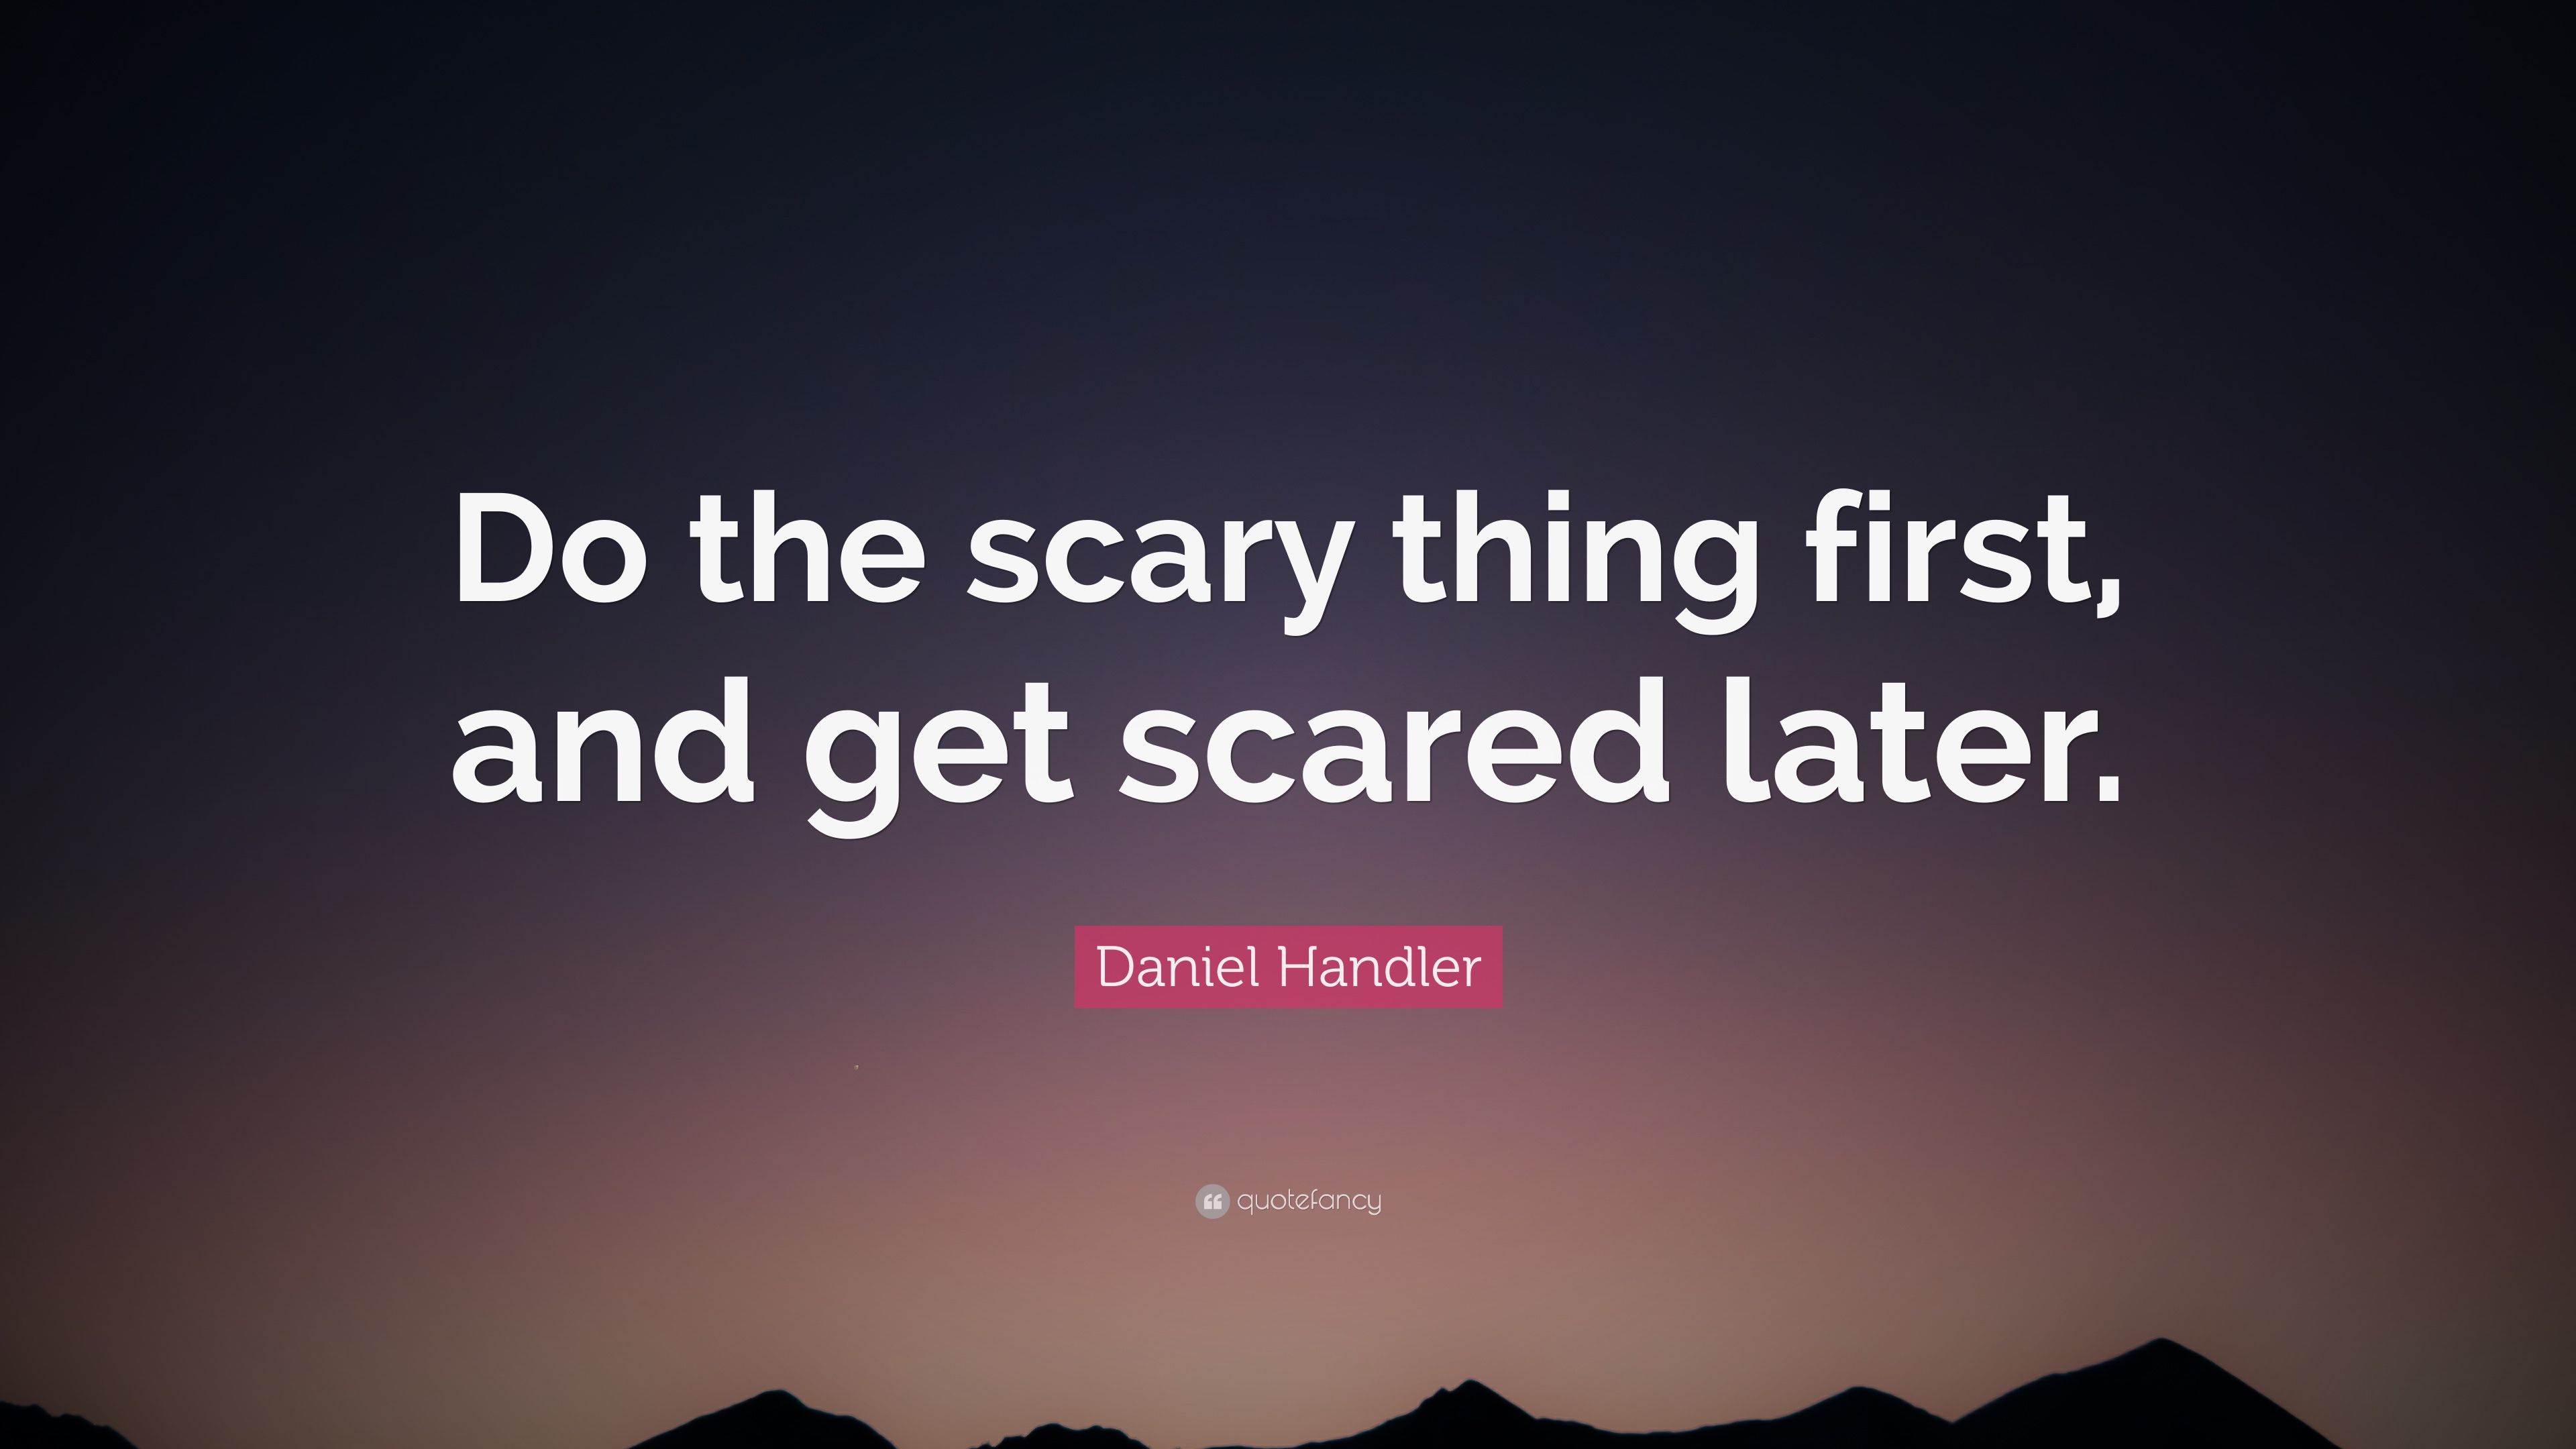 Daniel Handler Quote: “Do the scary thing first, and get scared